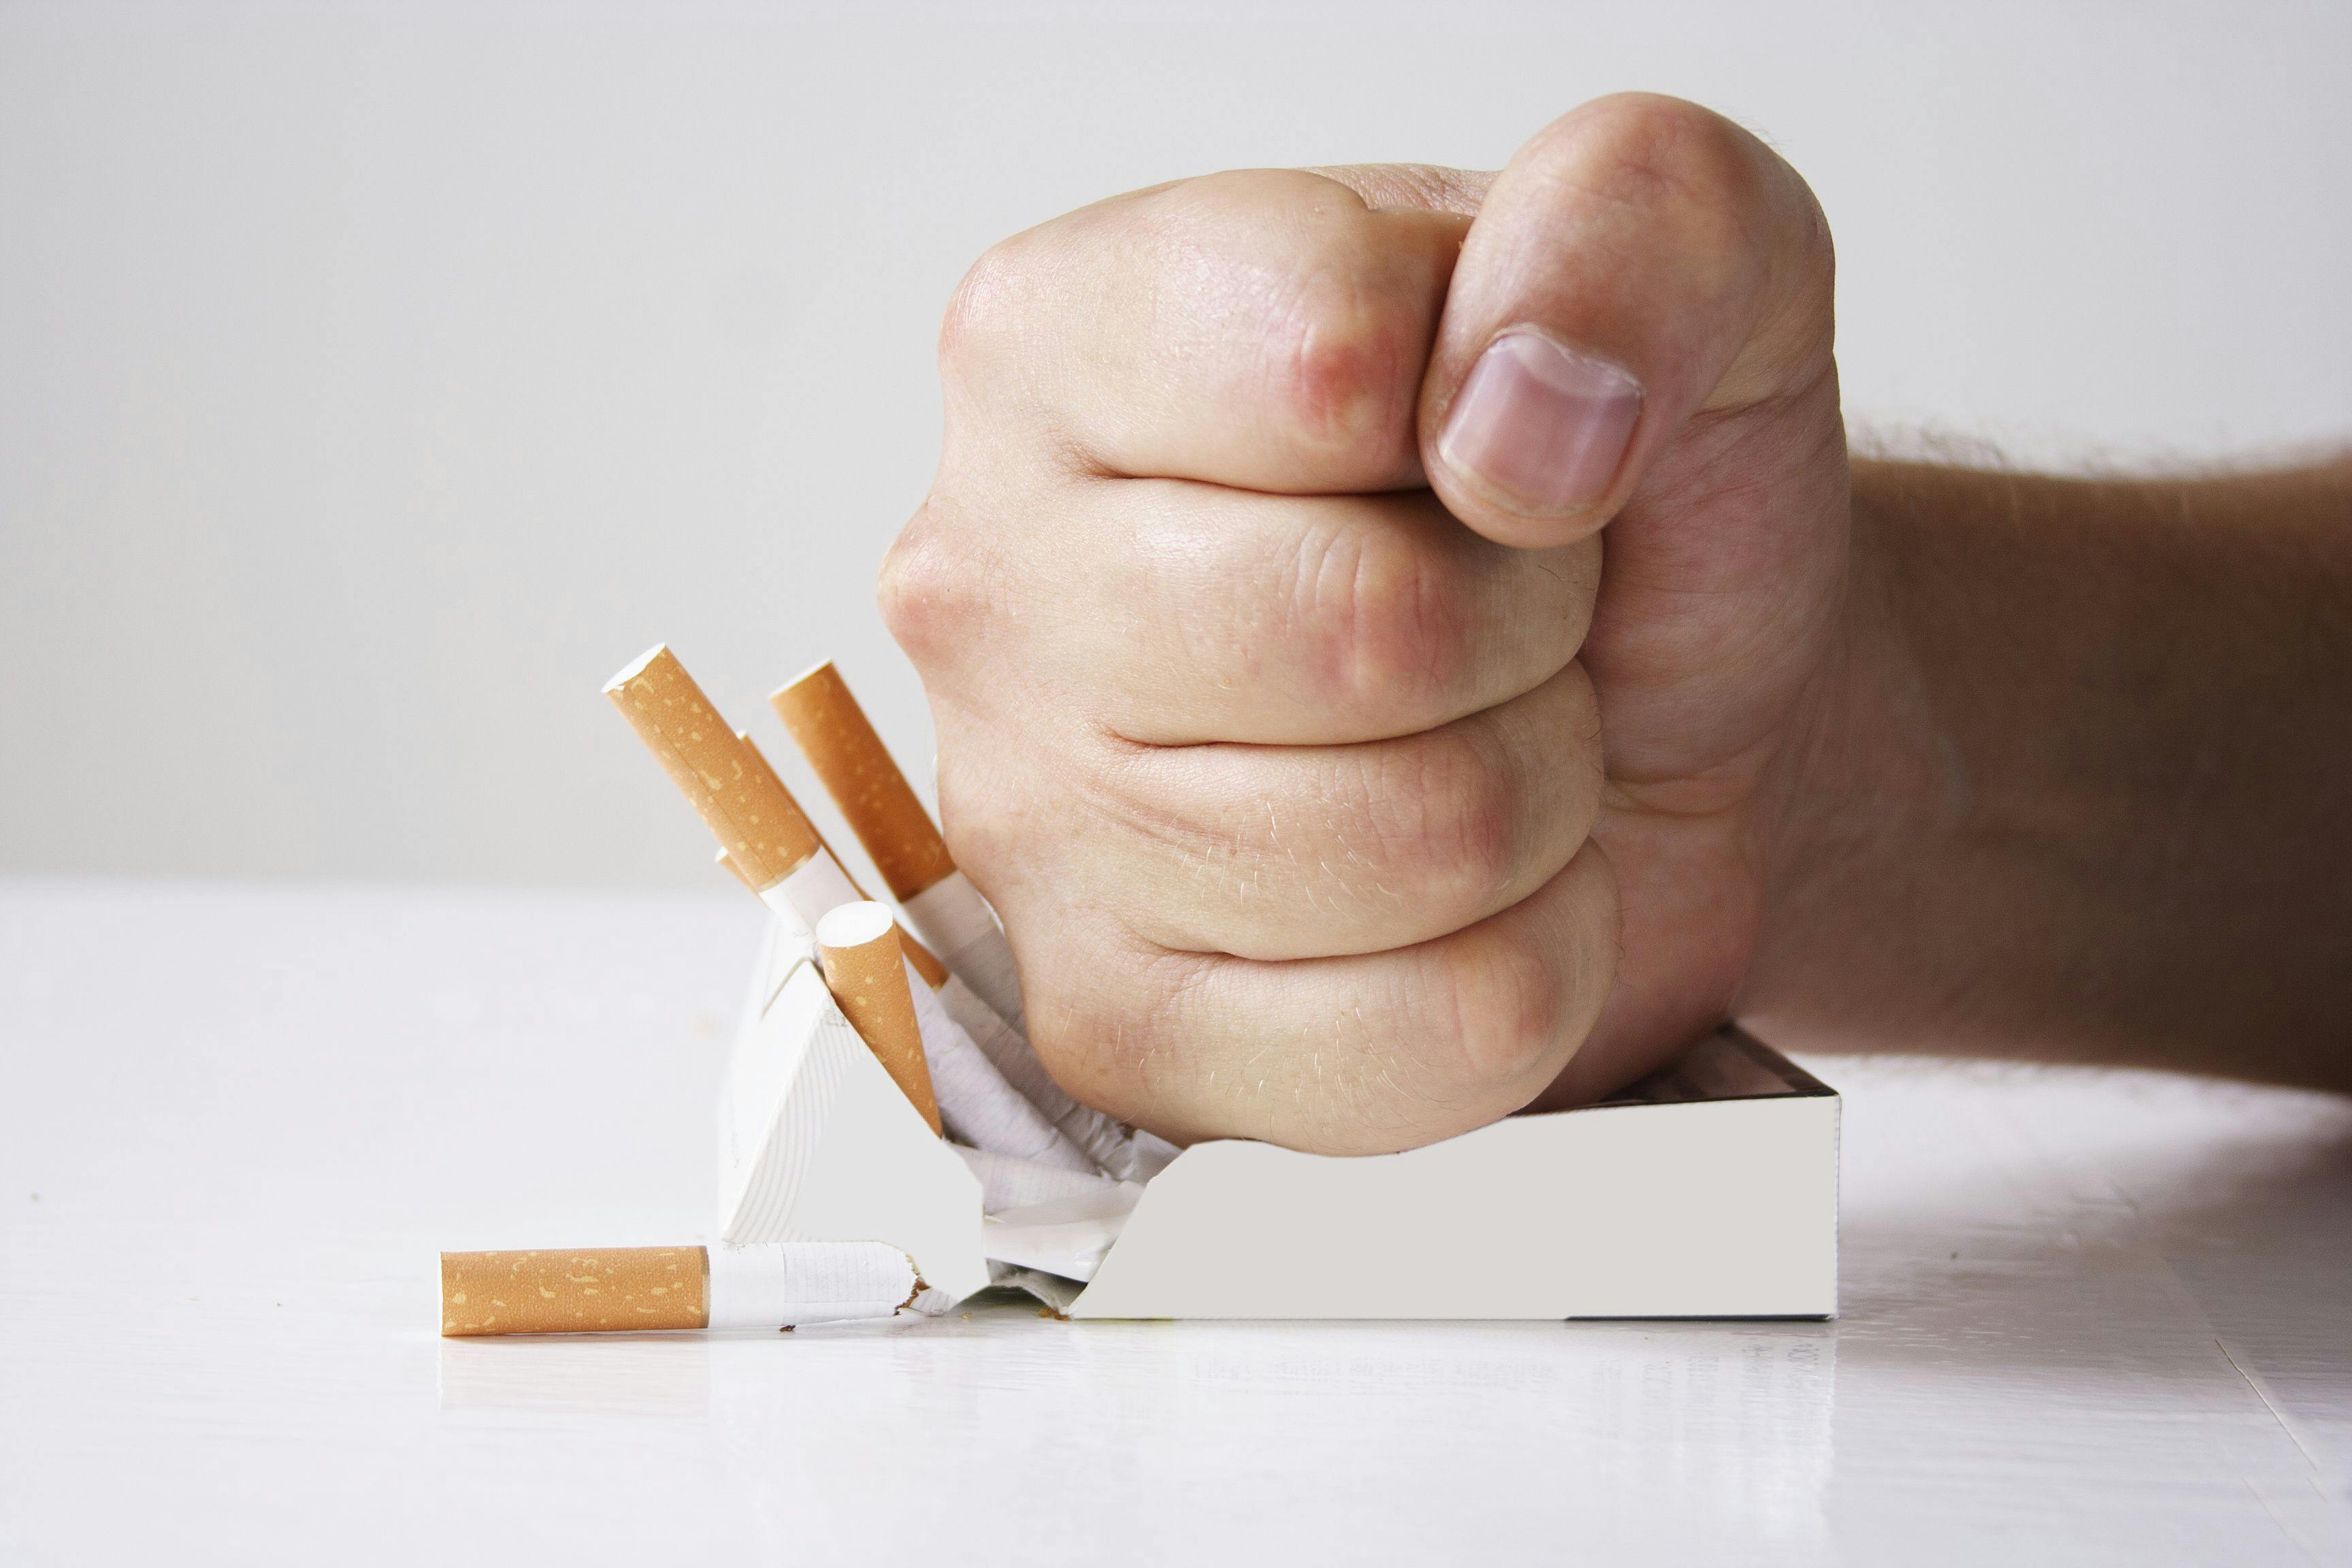 Cigarette Smokers Twice as Likely to Die from Cardiovascular Causes